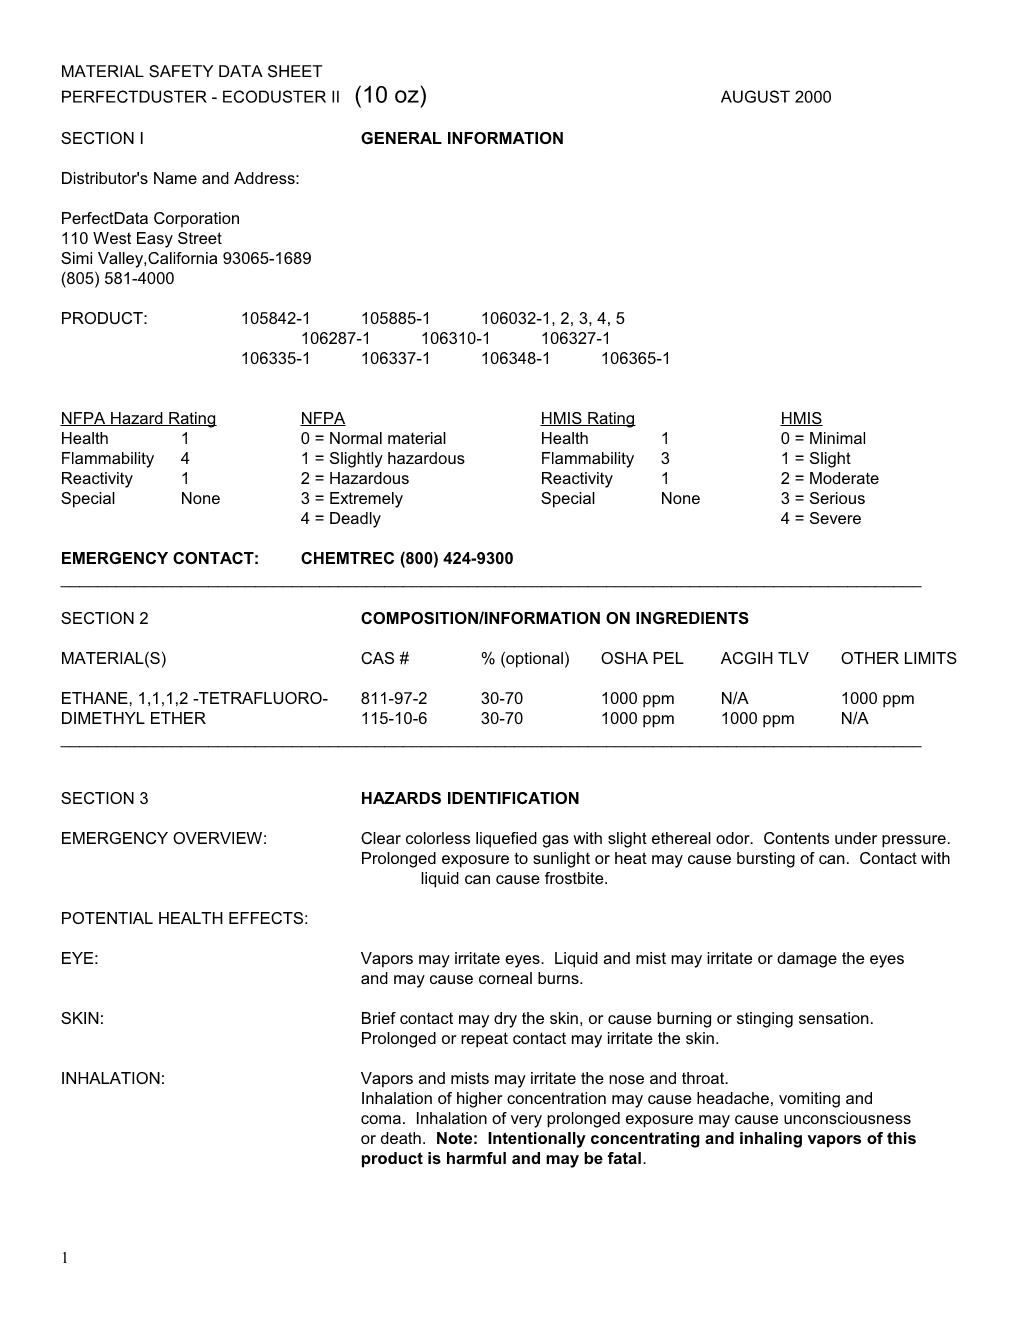 Material Safety Data Sheet s46